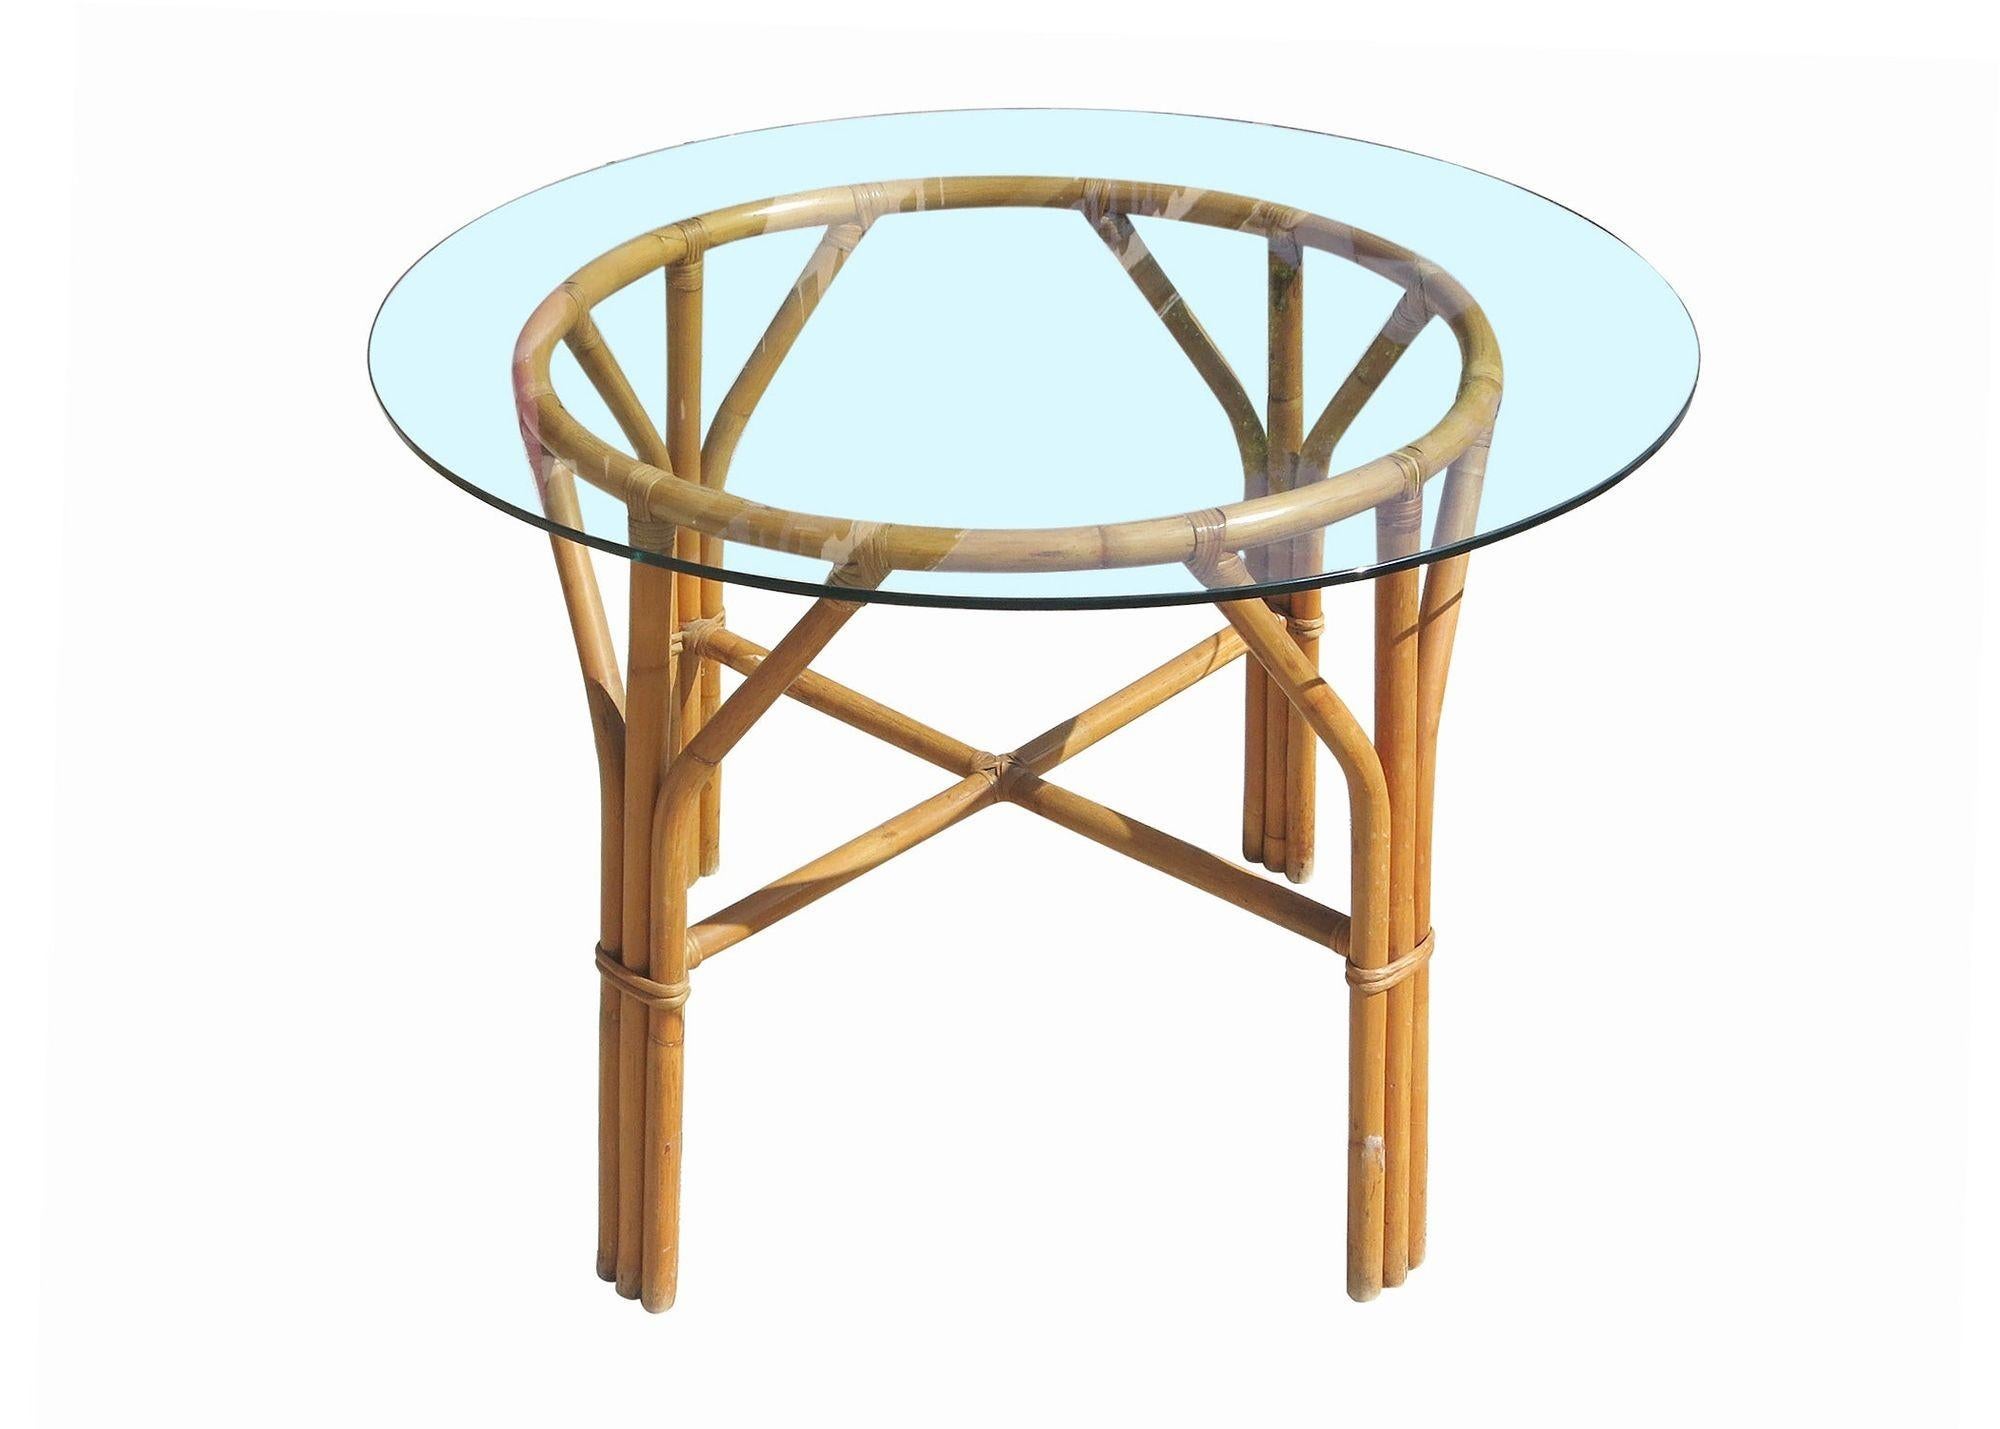 Mid-century rattan dining set featuring four dining chairs and dining table. This minimal, yet elegant dining table and chairs chair set features a steam pressed sculptural form with a round glass top for the table. This set can easily accommodate